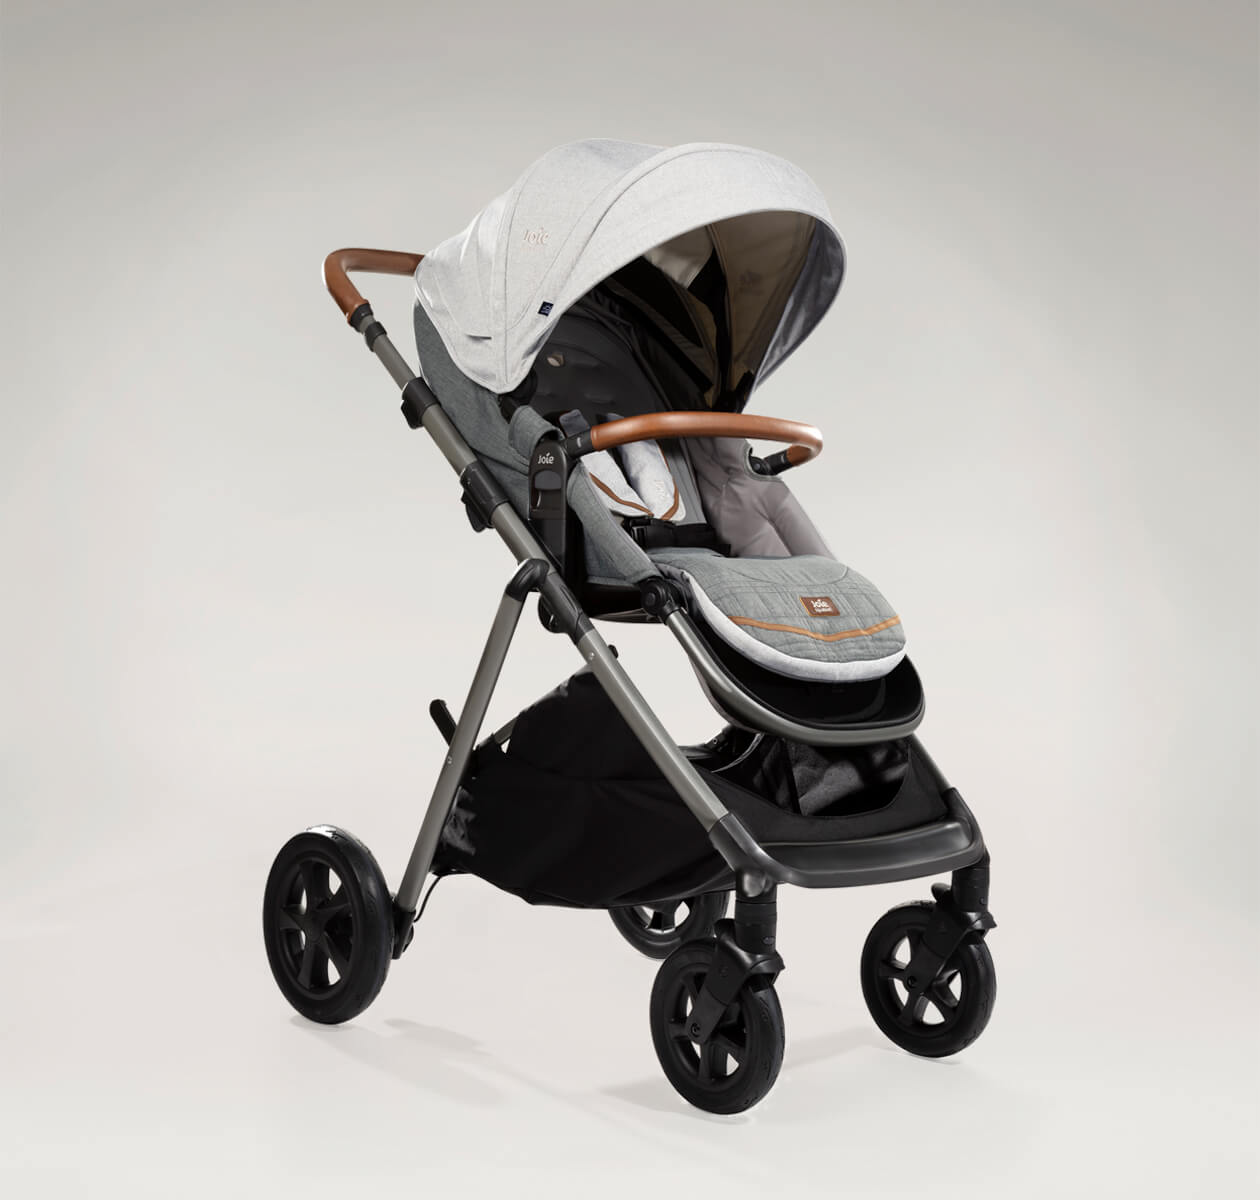 Joie aeria pram in light gray at an angle. 